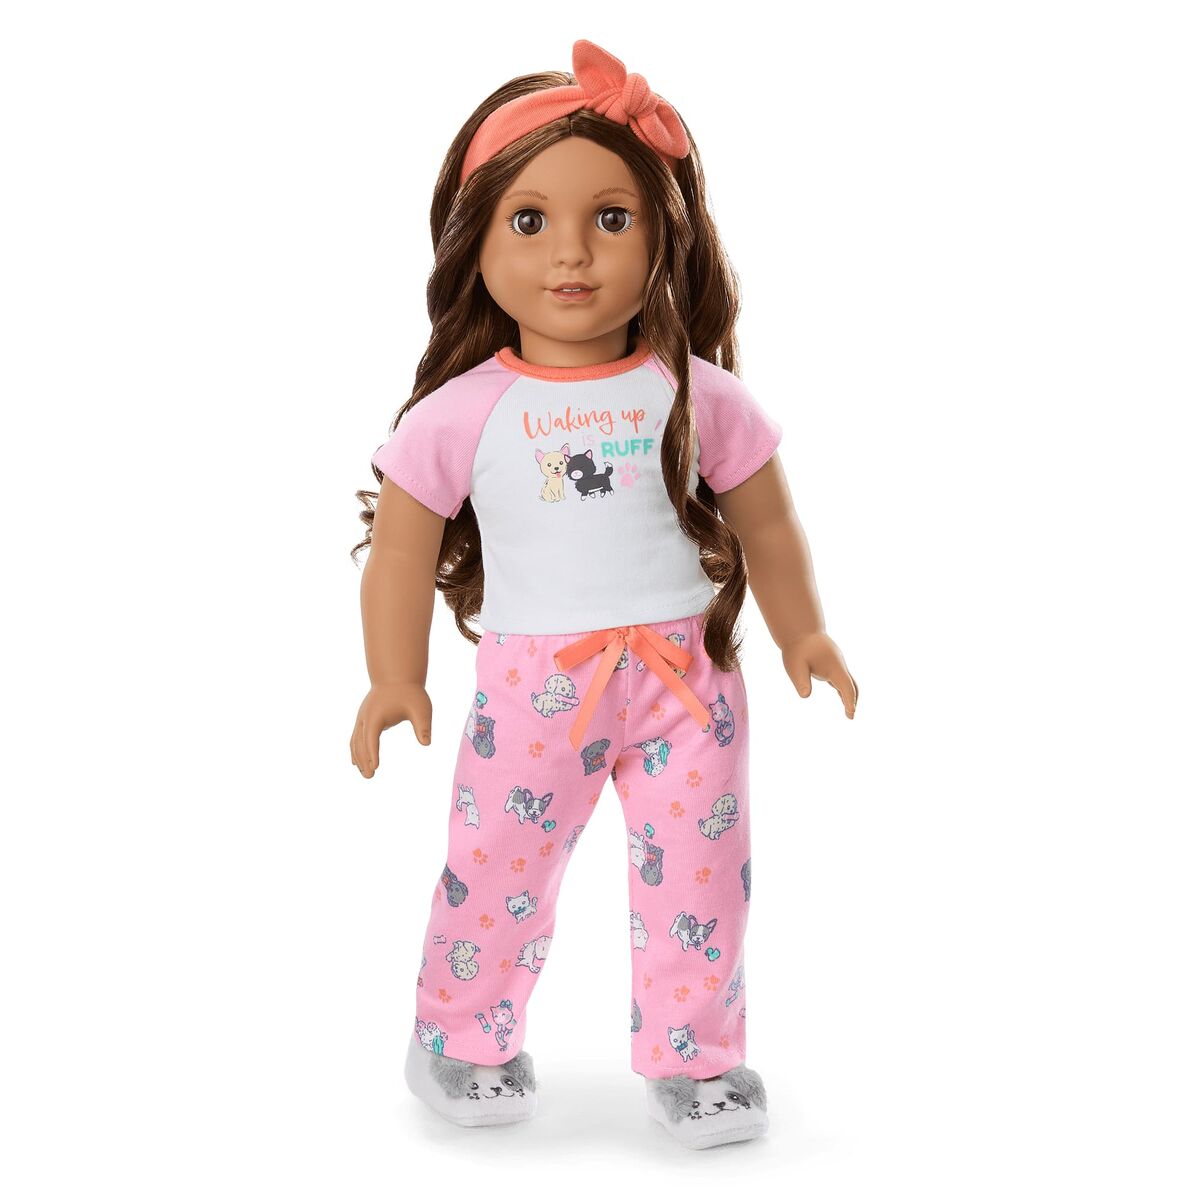 Waking Up Is Ruff PJs for Girls & Dolls | American Girl®